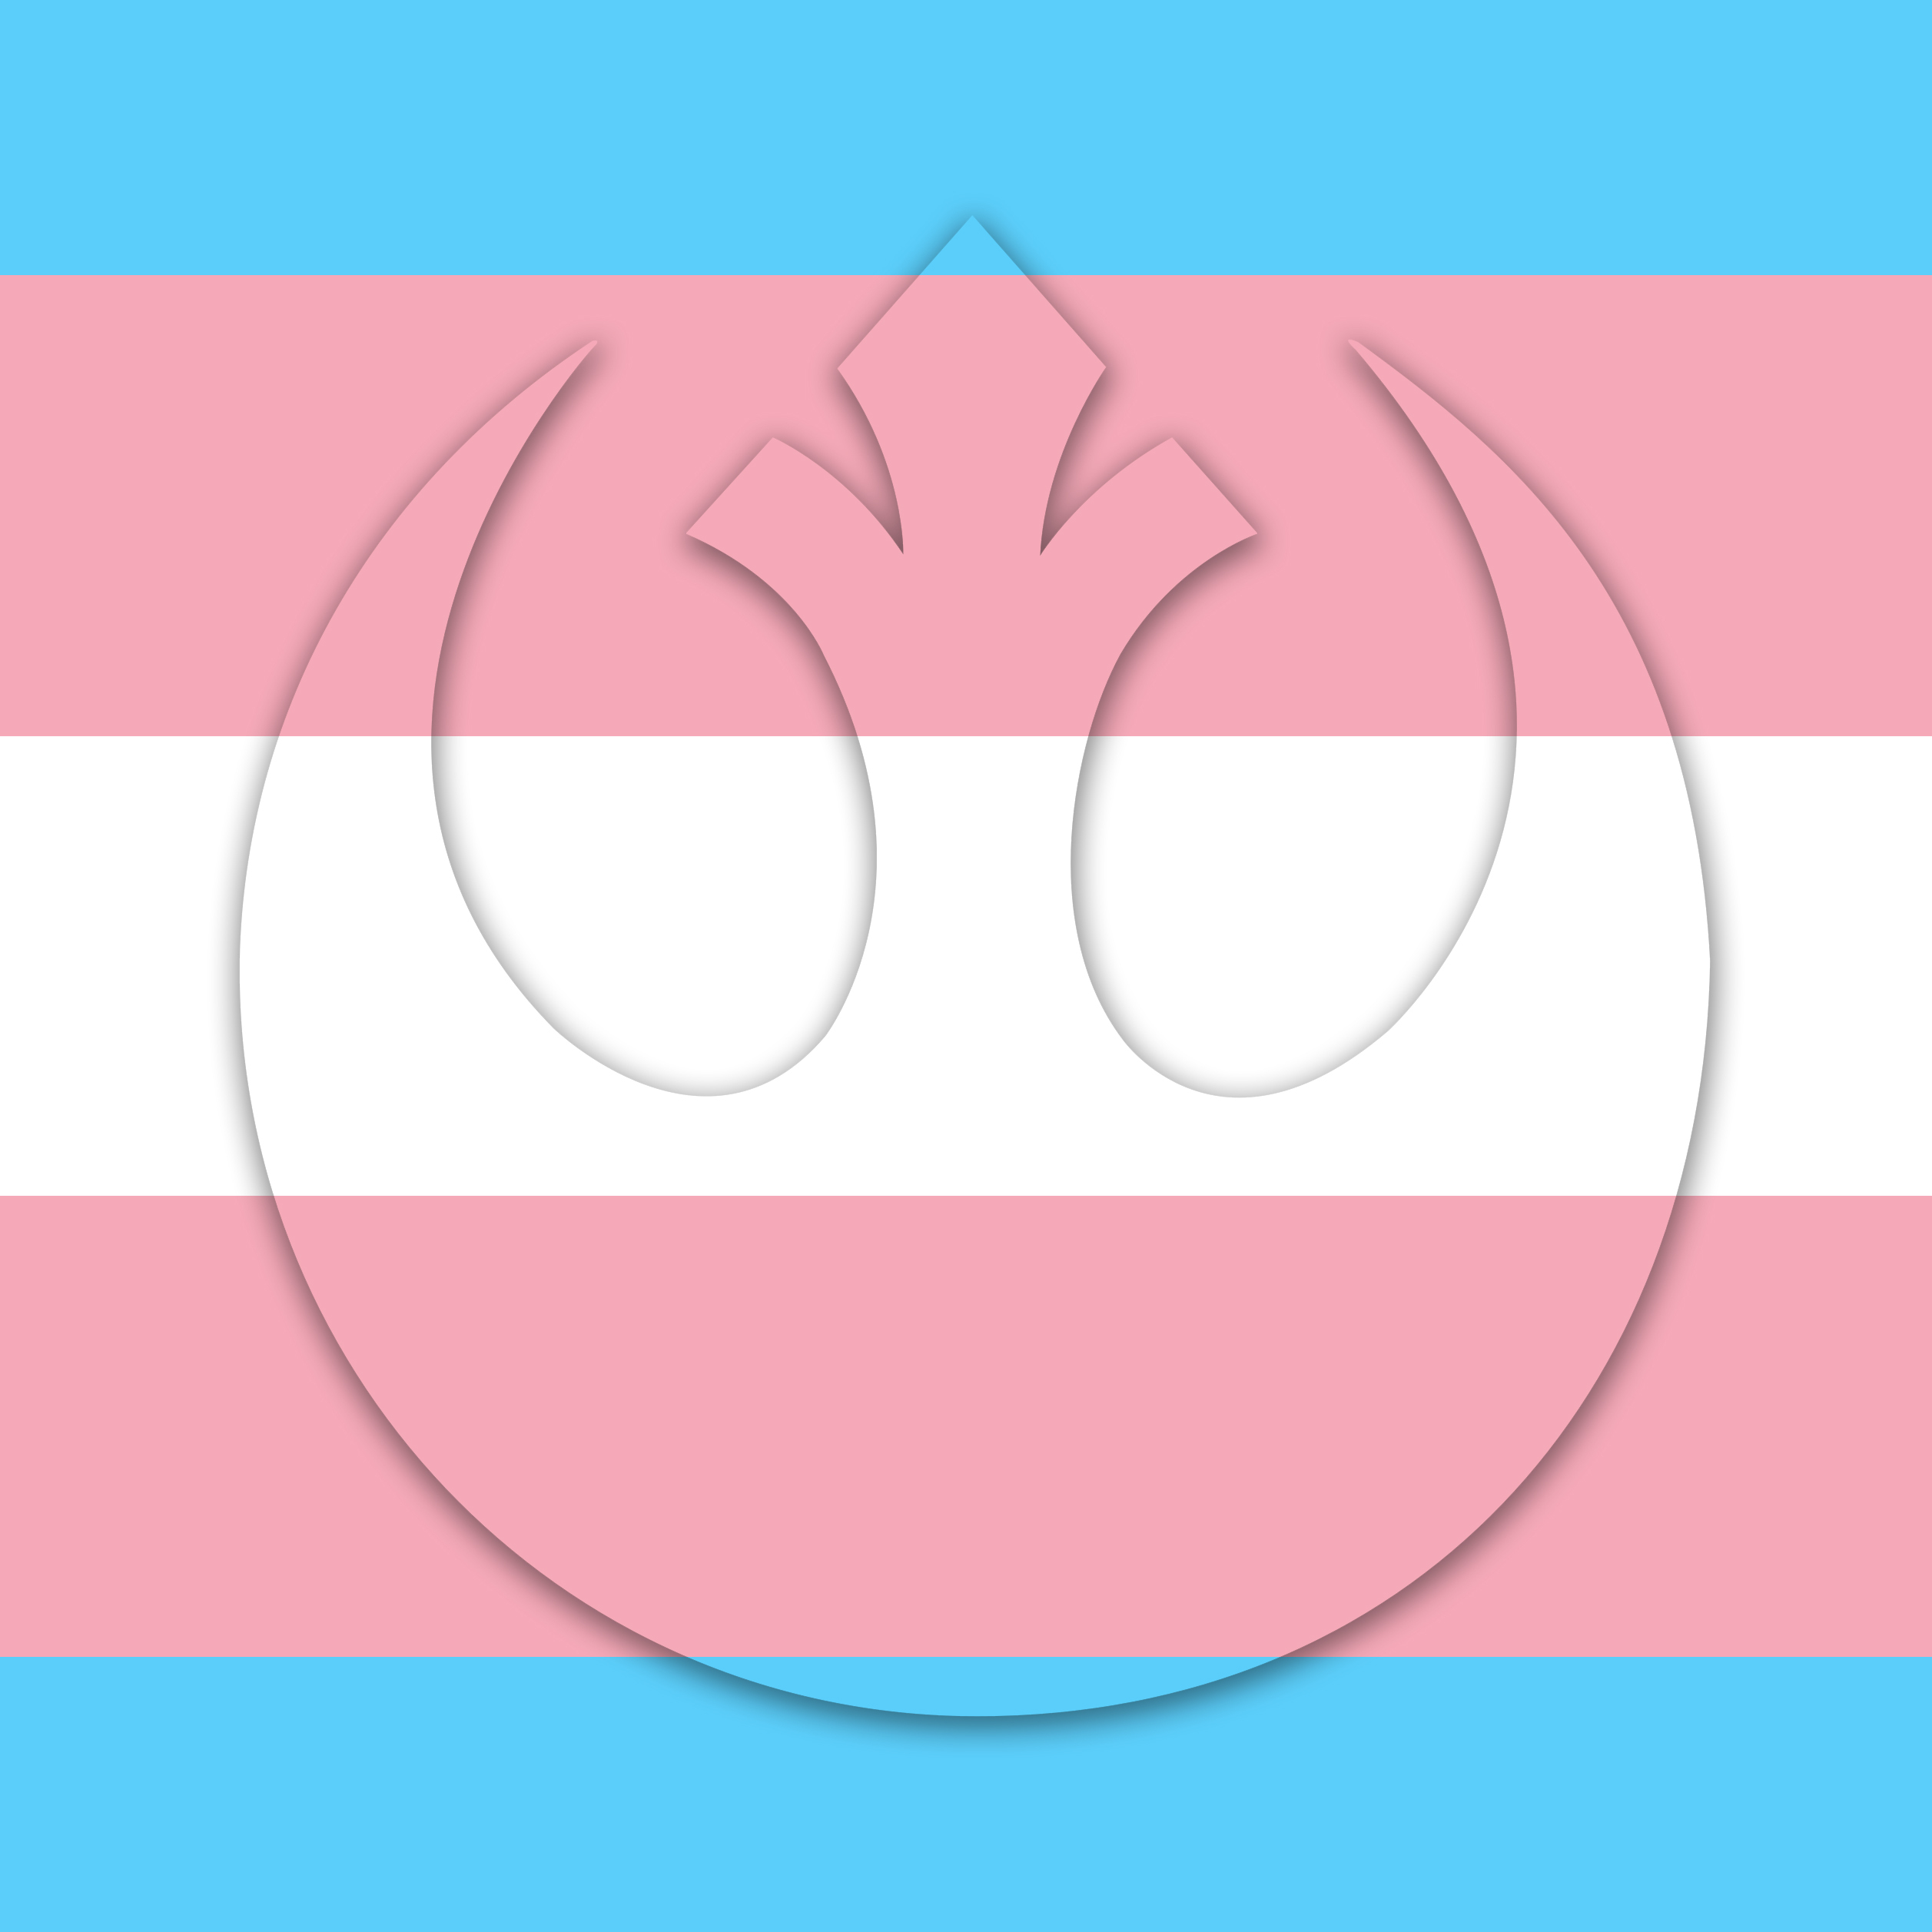 Special Kath-Only Microepisode: For Cis Straights At Their First Pride